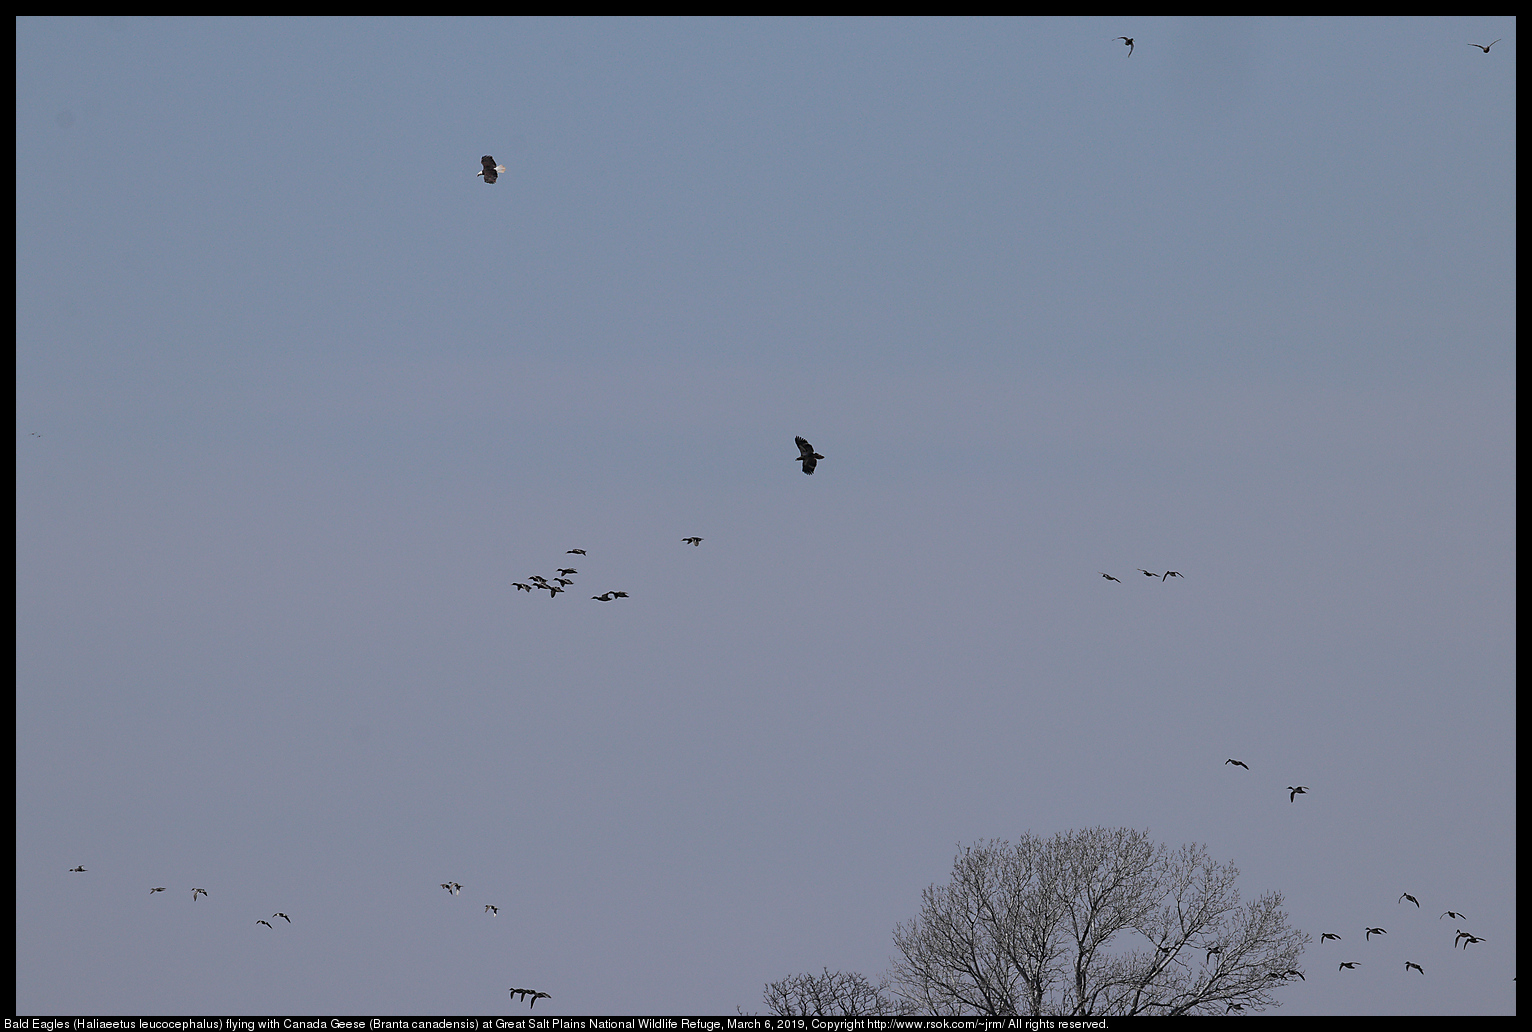 Bald Eagles (Haliaeetus leucocephalus) flying with Canada Geese (Branta canadensis) at Great Salt Plains National Wildlife Refuge, March 6, 2019